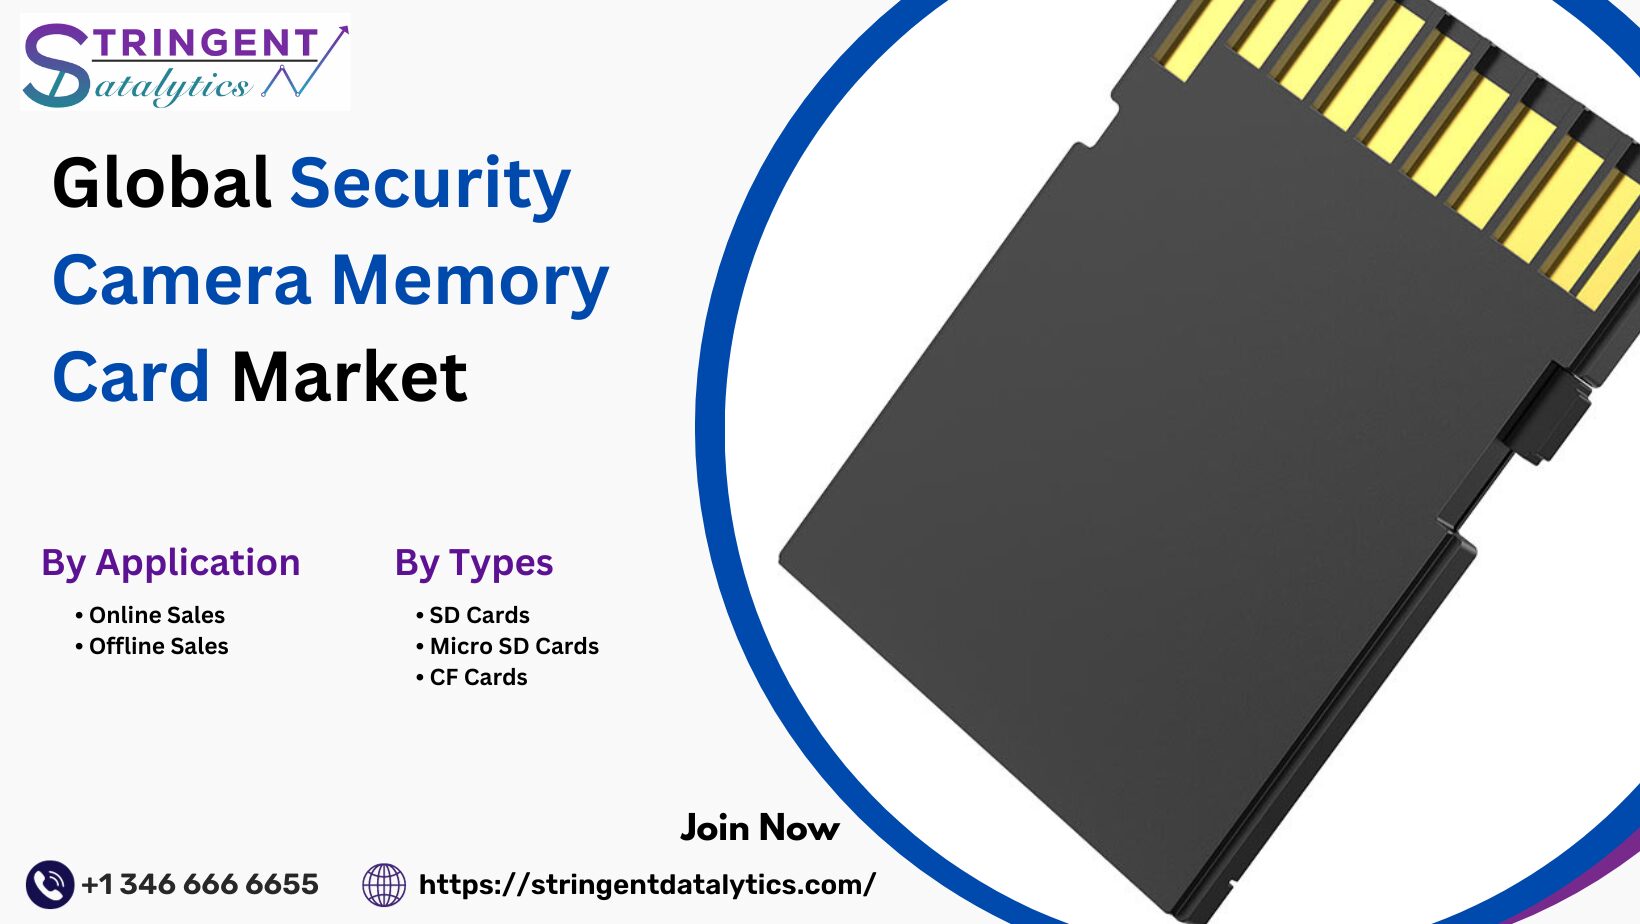 Security Camera Memory Card Market Overview Analysis, Trends, Share, Size, Type & Future Forecast to 2032